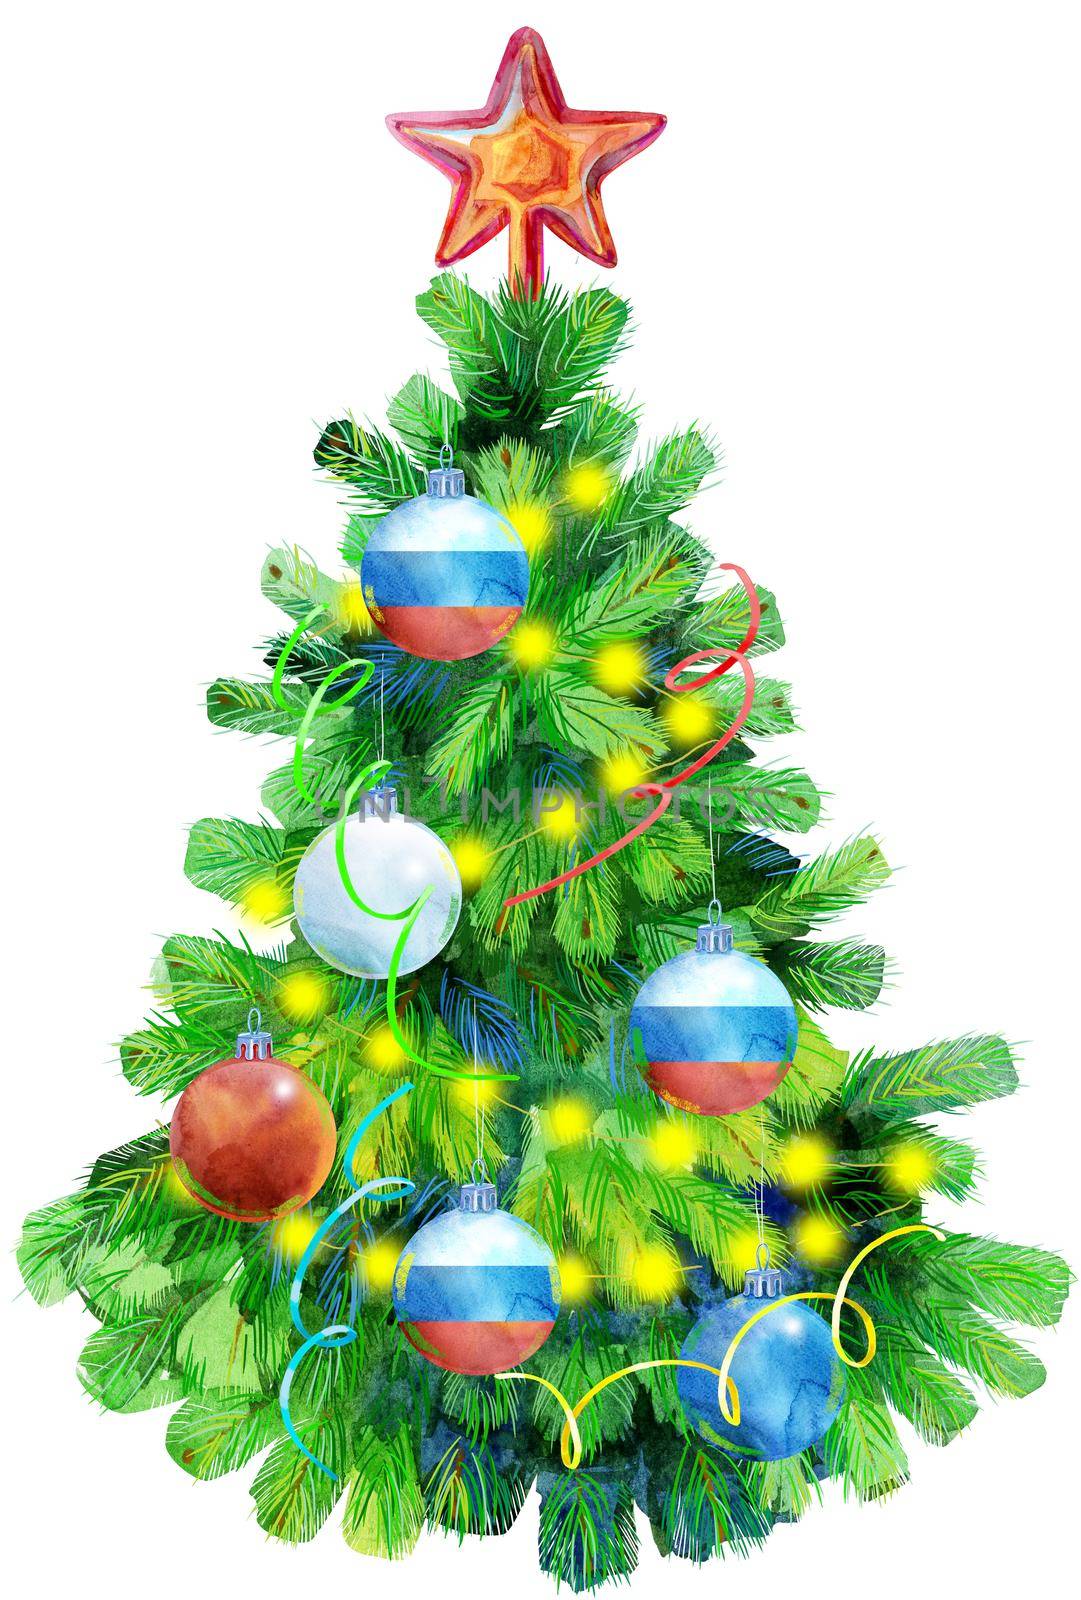 Watercolor illustration: Christmas tree decorated with balls. Template for the design of posters, cards, invitations